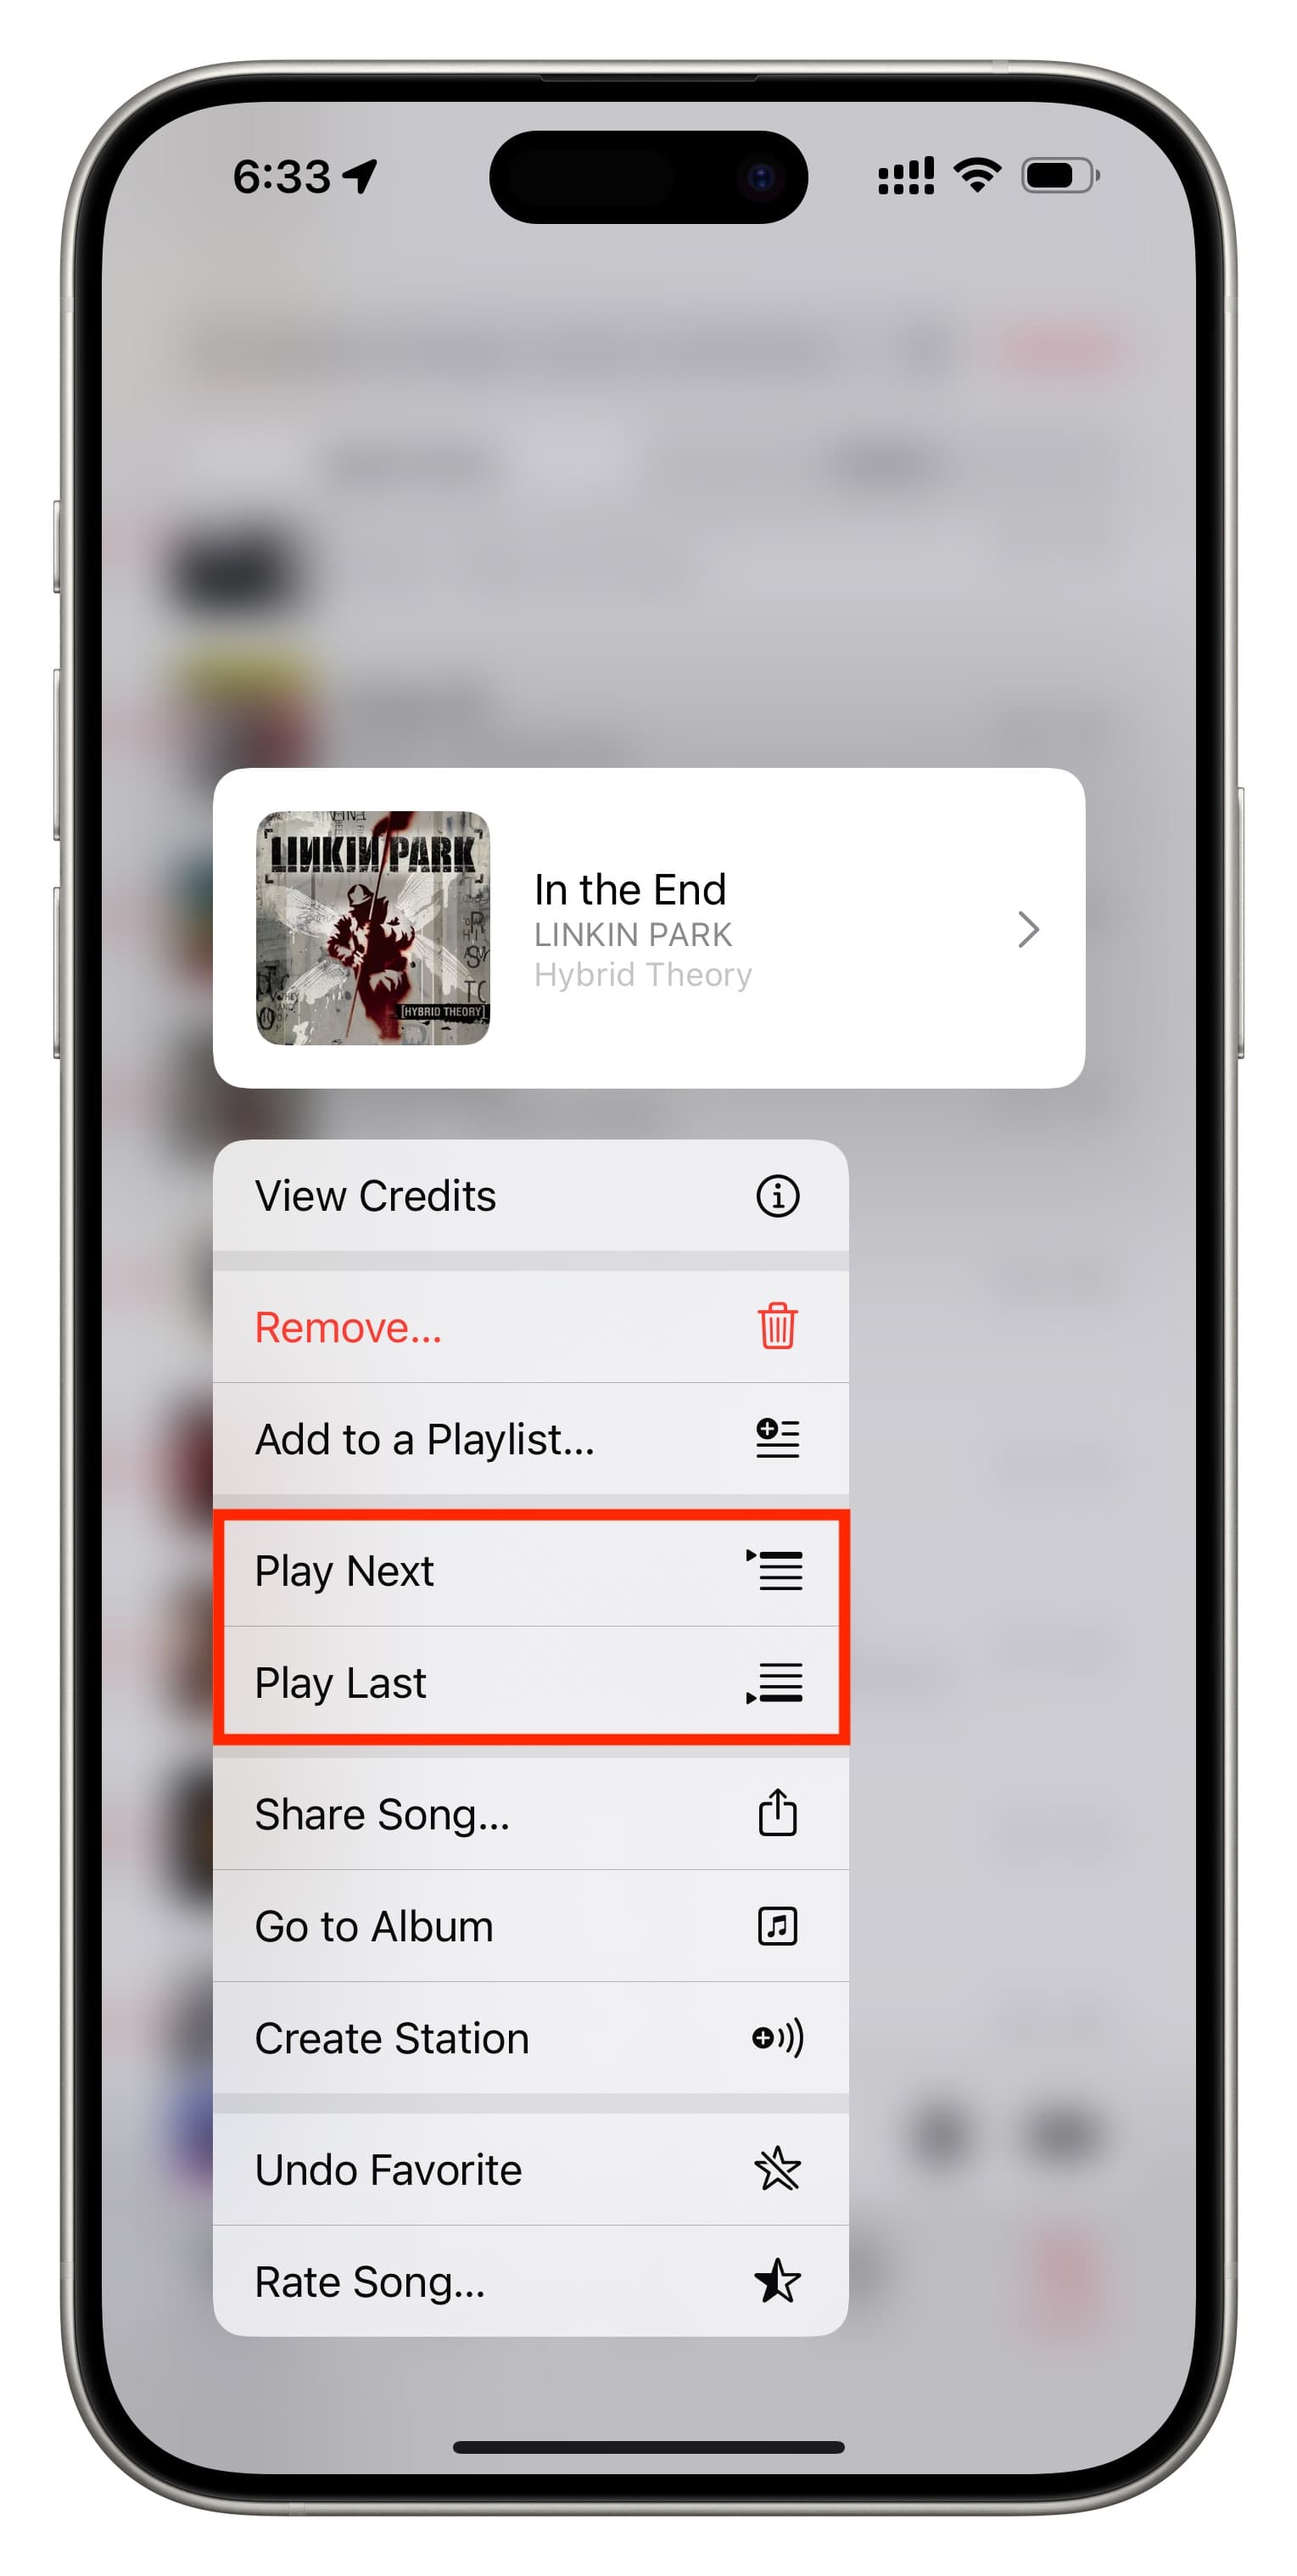 Touch and hold to play next or play last in queue in Music app